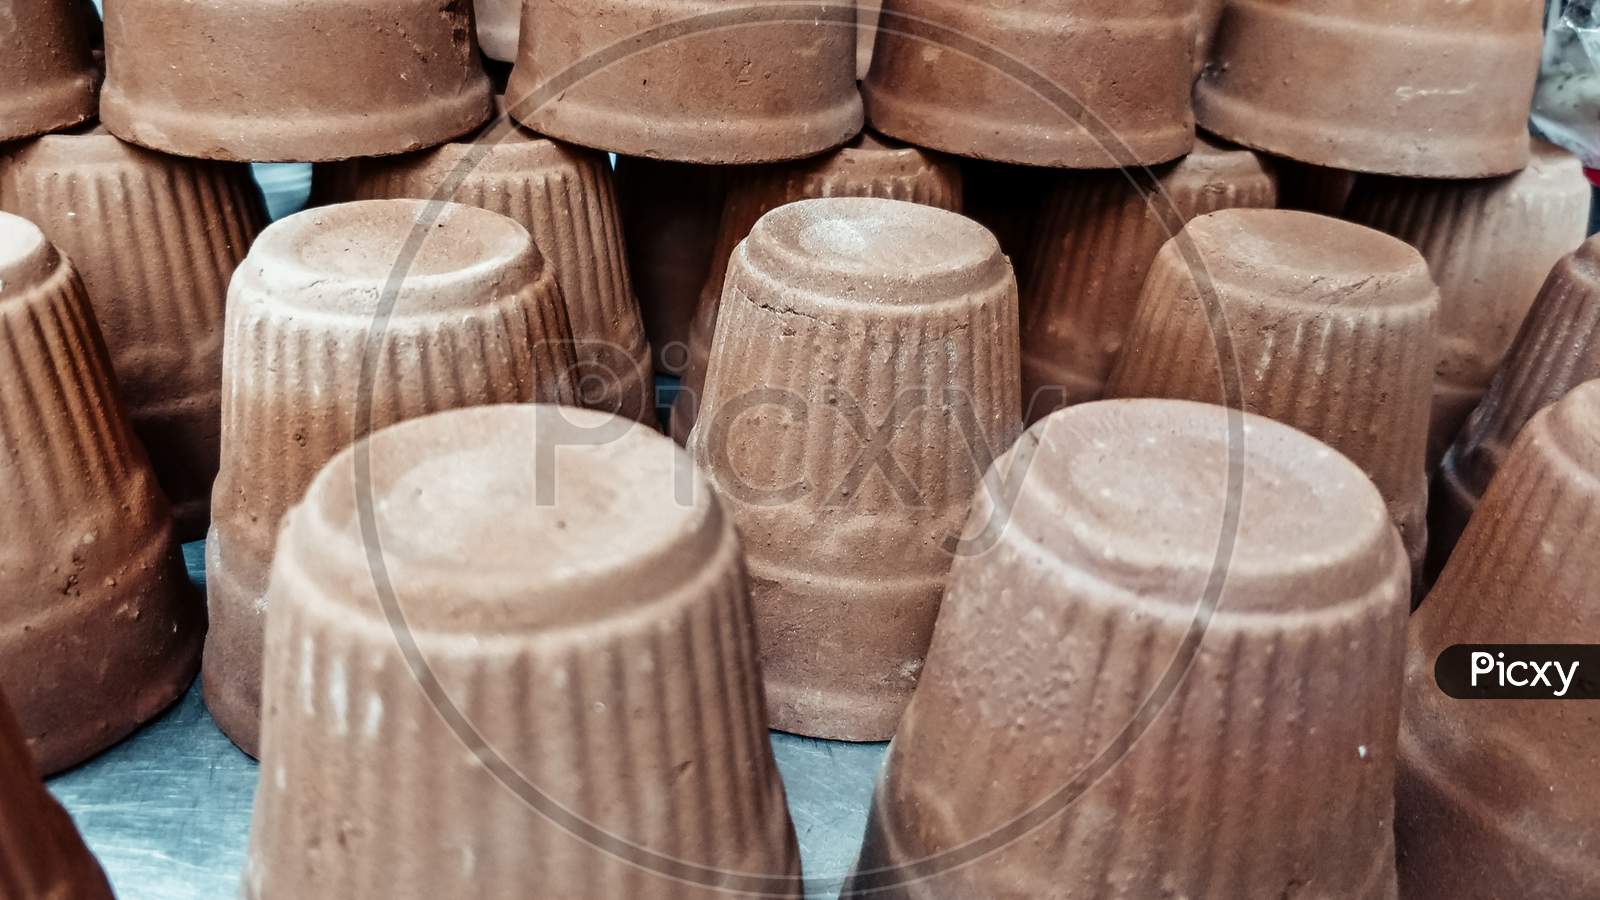 Image Of Cups Made Of Mud Or Sand Called Kulhad/Kullhad Used To Serve Authentic Indian Drinks Called Lassie/Lassi, Milk, Tea.